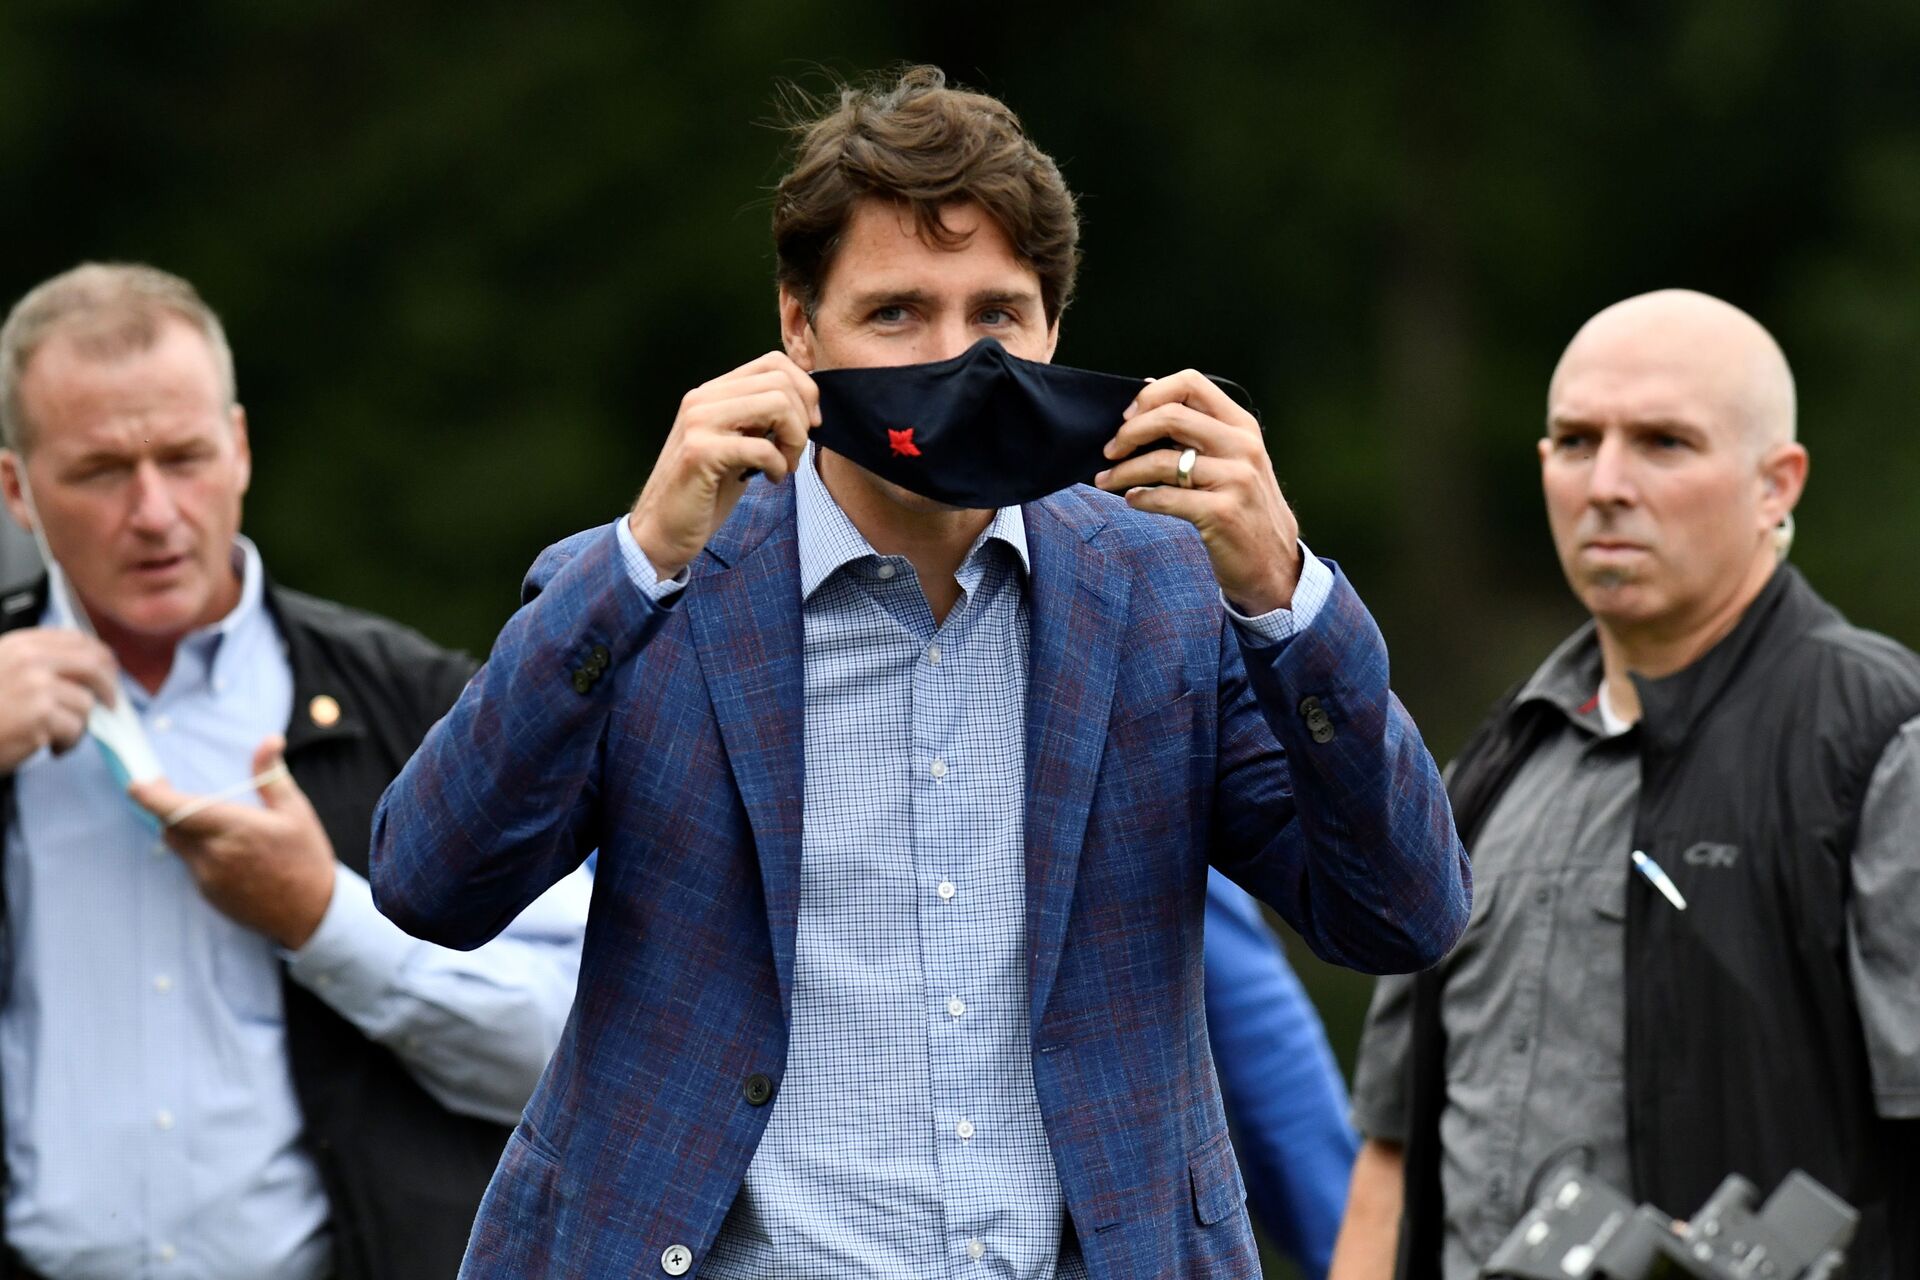 Canada's Prime Minister Justin Trudeau puts on a face mask at Town Centre Park in Coquitlam, British Columbia, Canada July 8, 2021. - Sputnik International, 1920, 15.09.2021